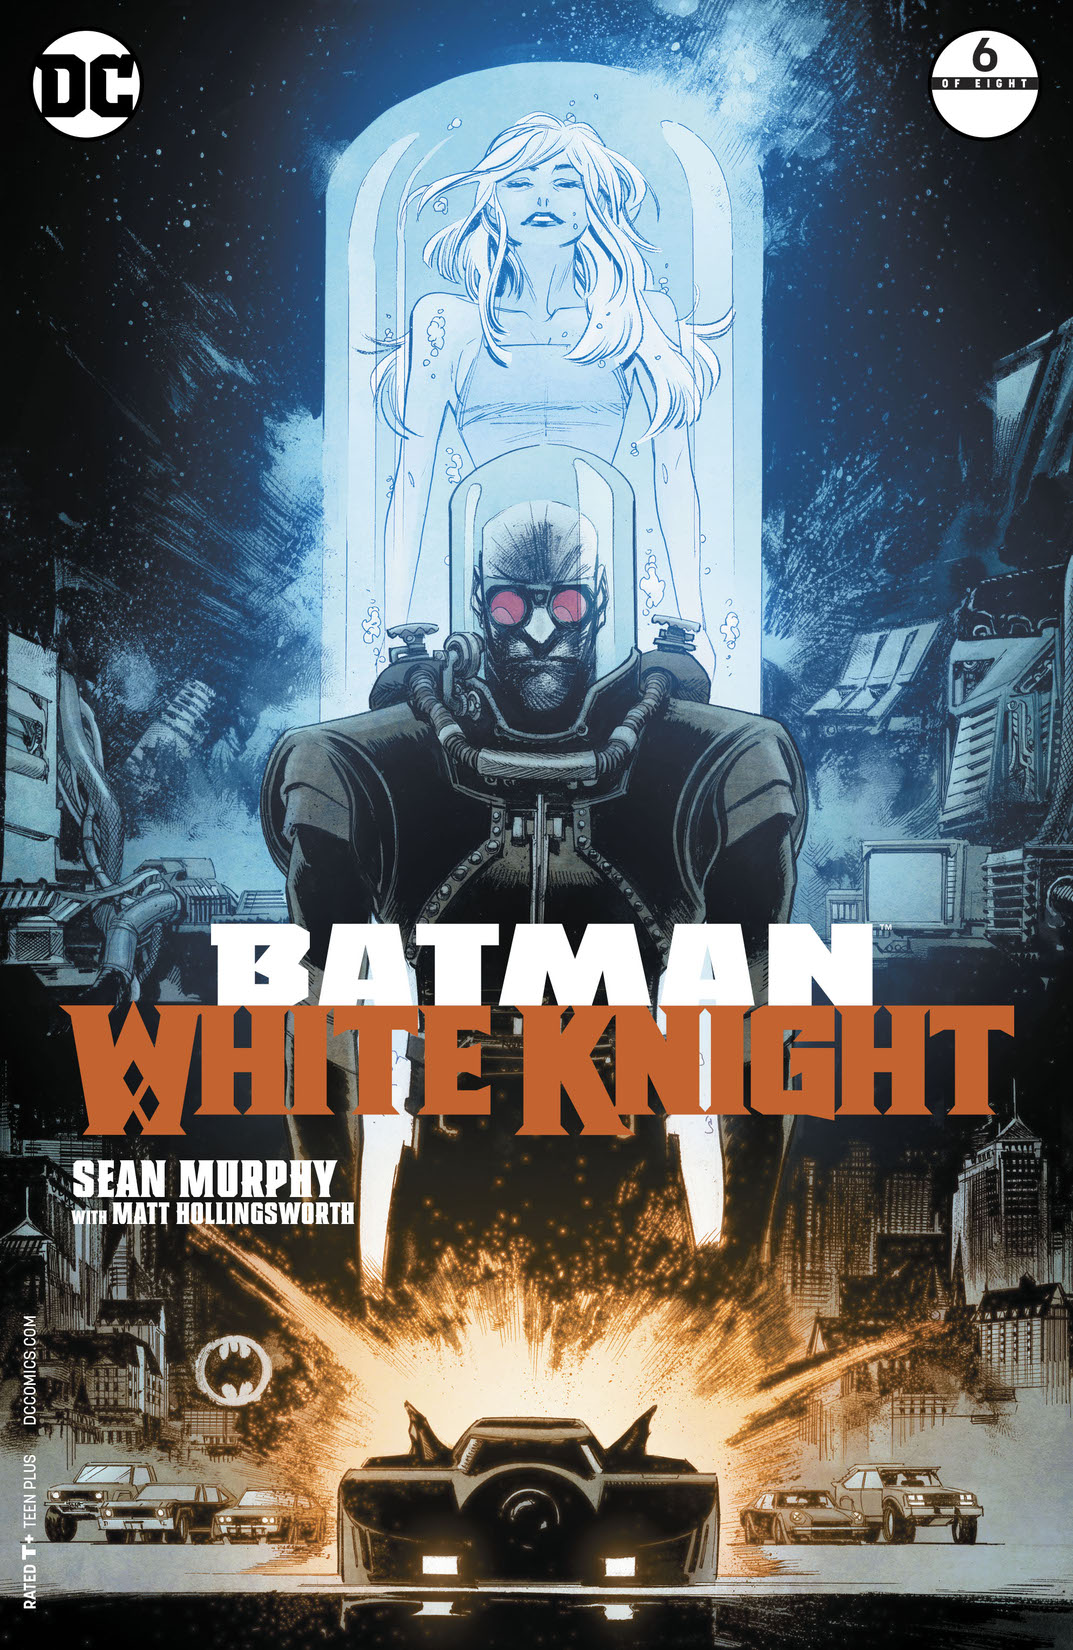 Batman: White Knight #6 preview images